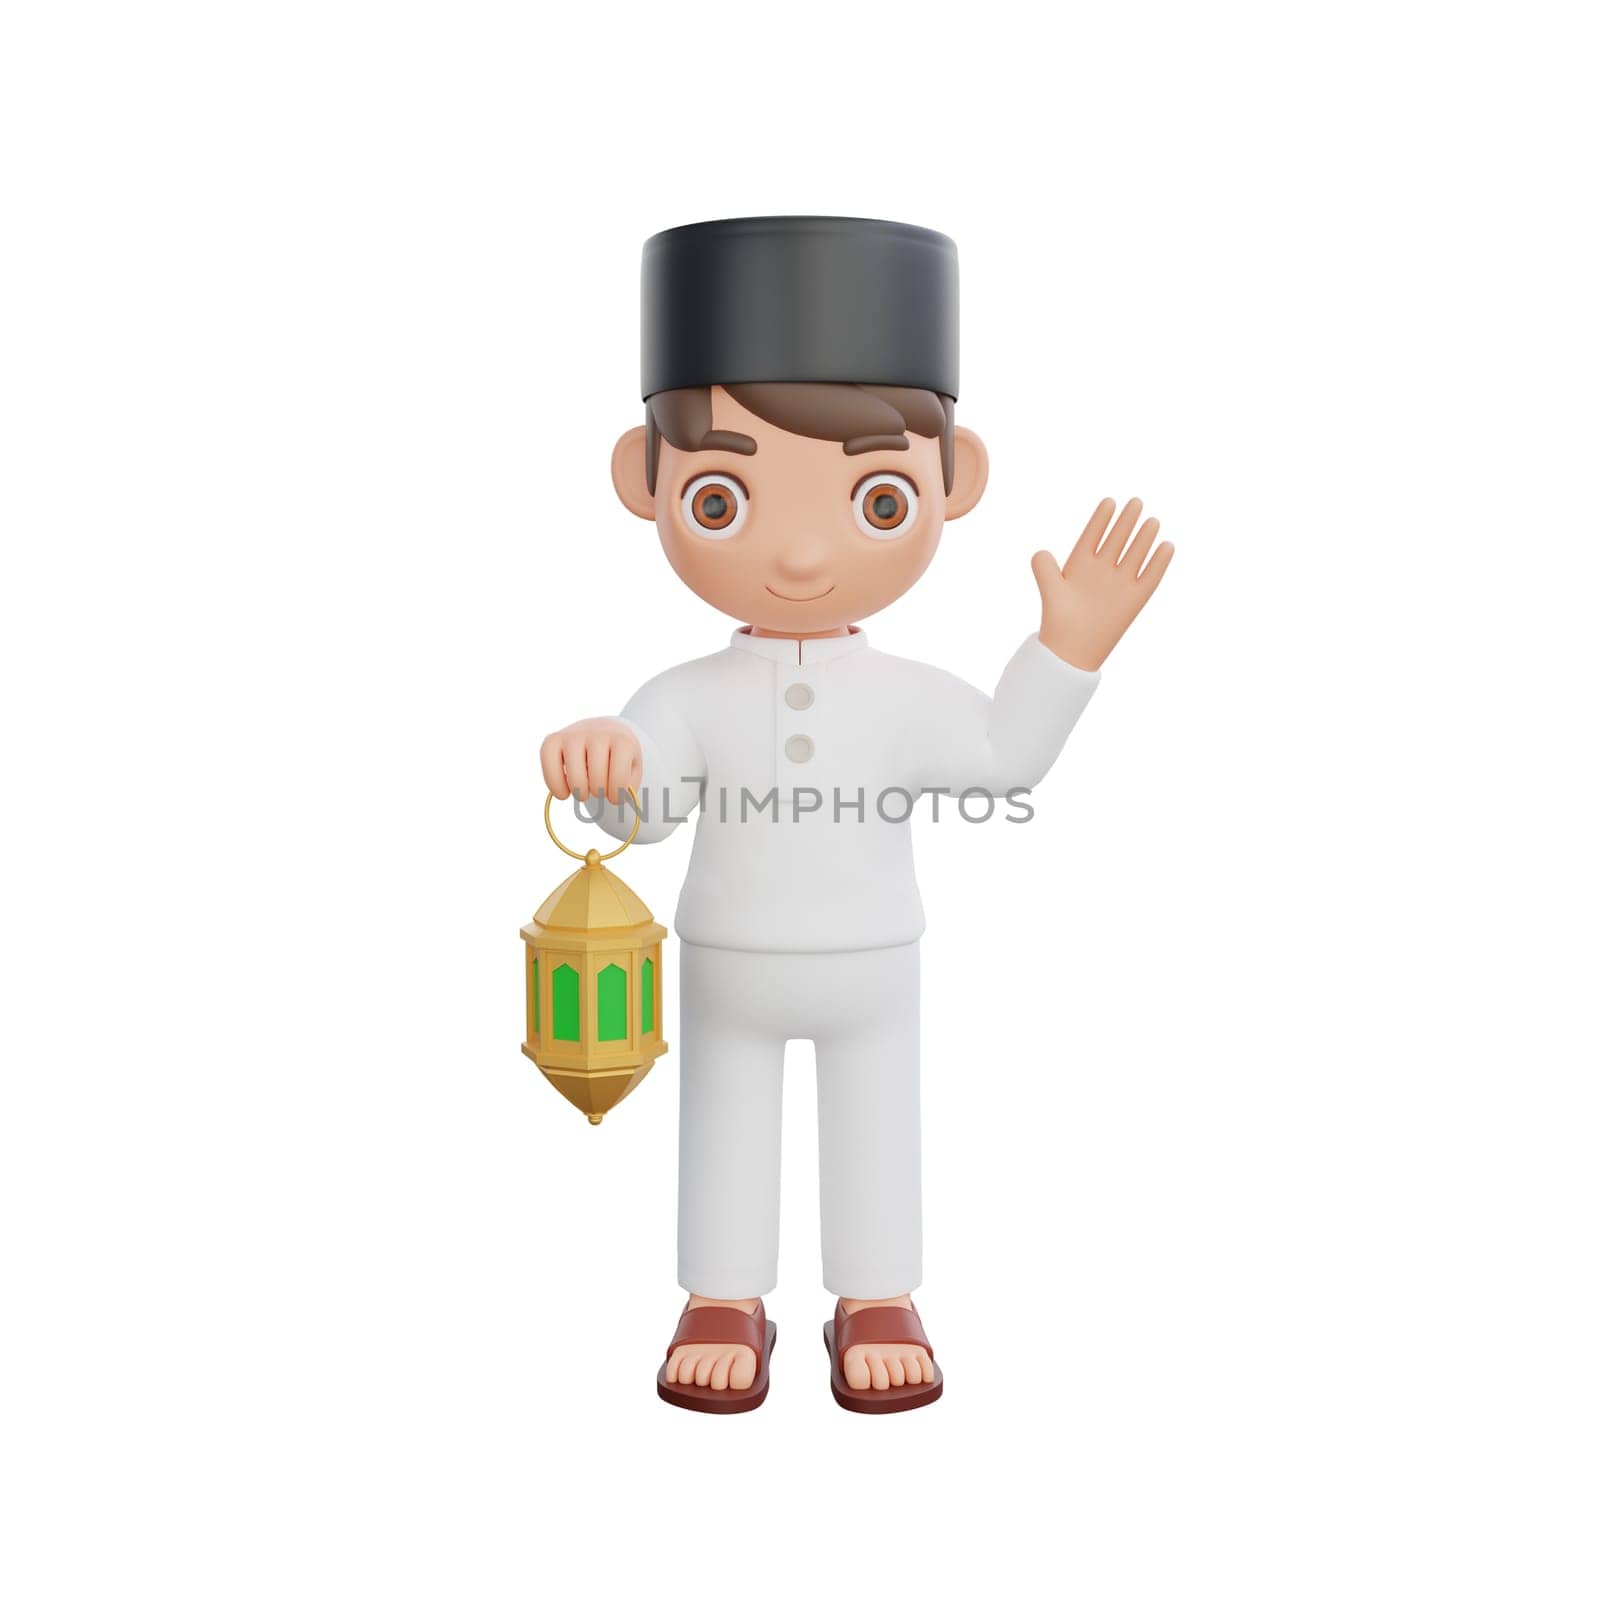 3D Illustration of Muslim character holding a lantern, perfect for Ramadan kareem themed projects